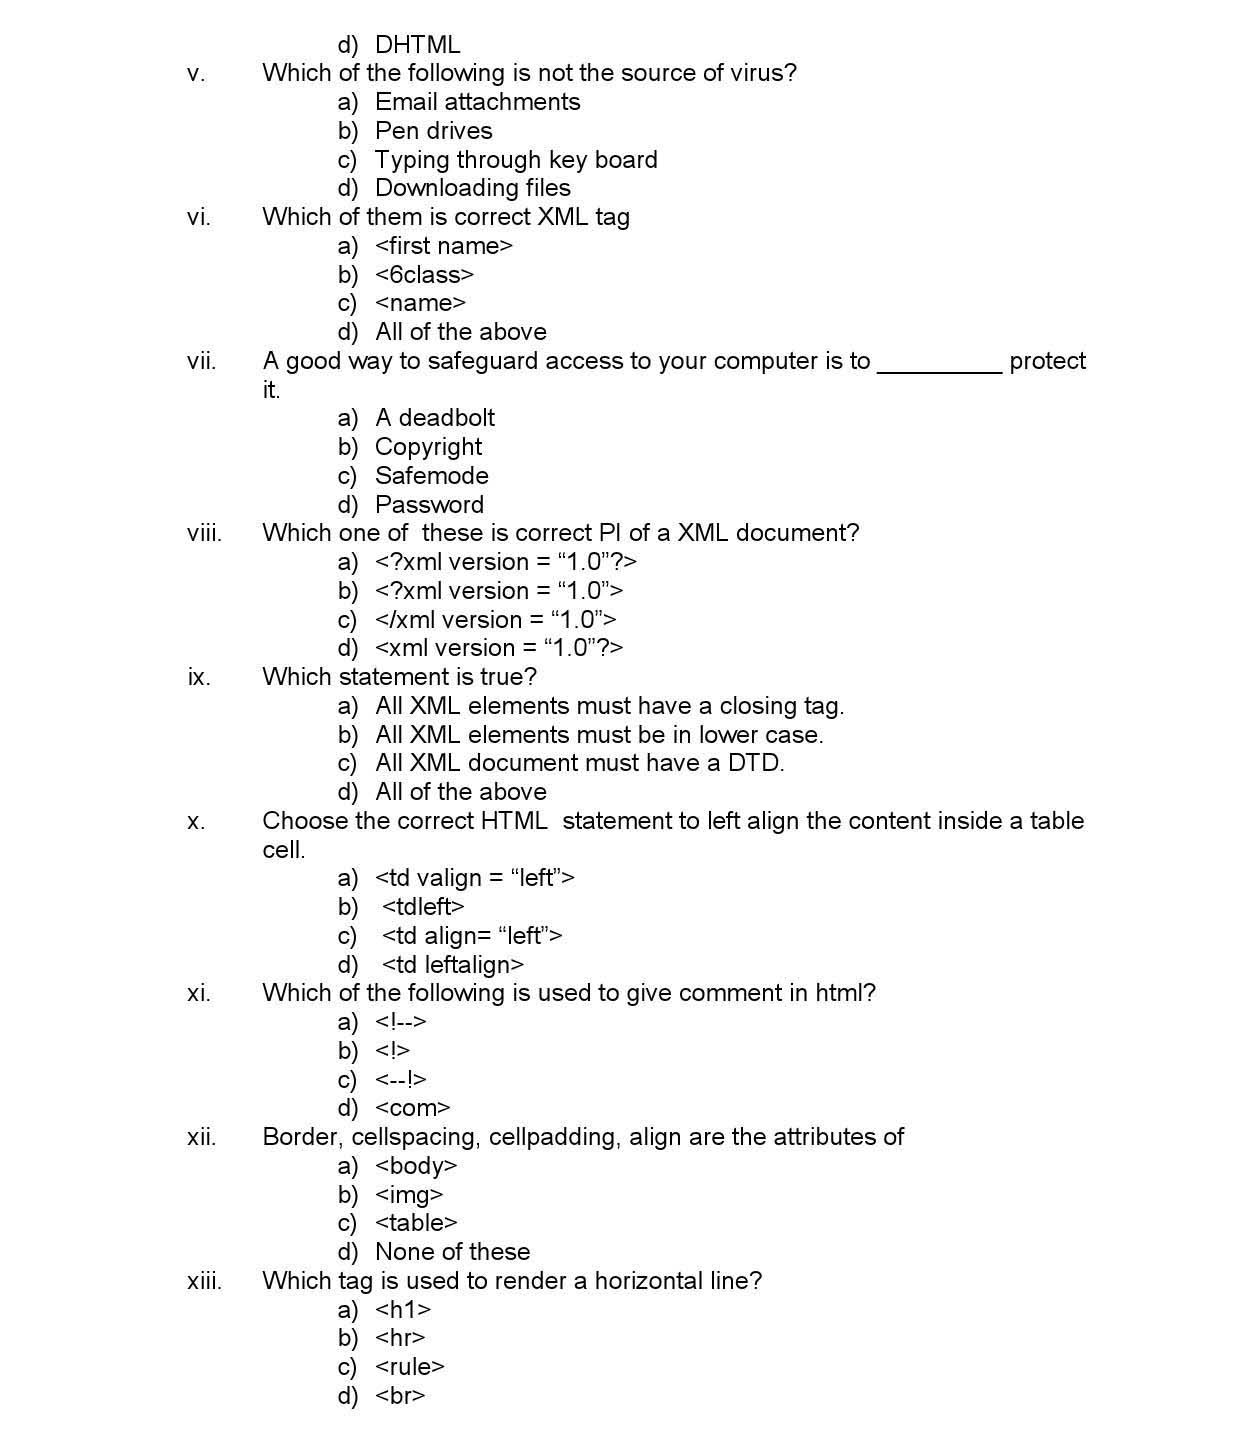 Foundation of Information Technology CBSE Class X Sample Question Paper 2015 16 - Image 5